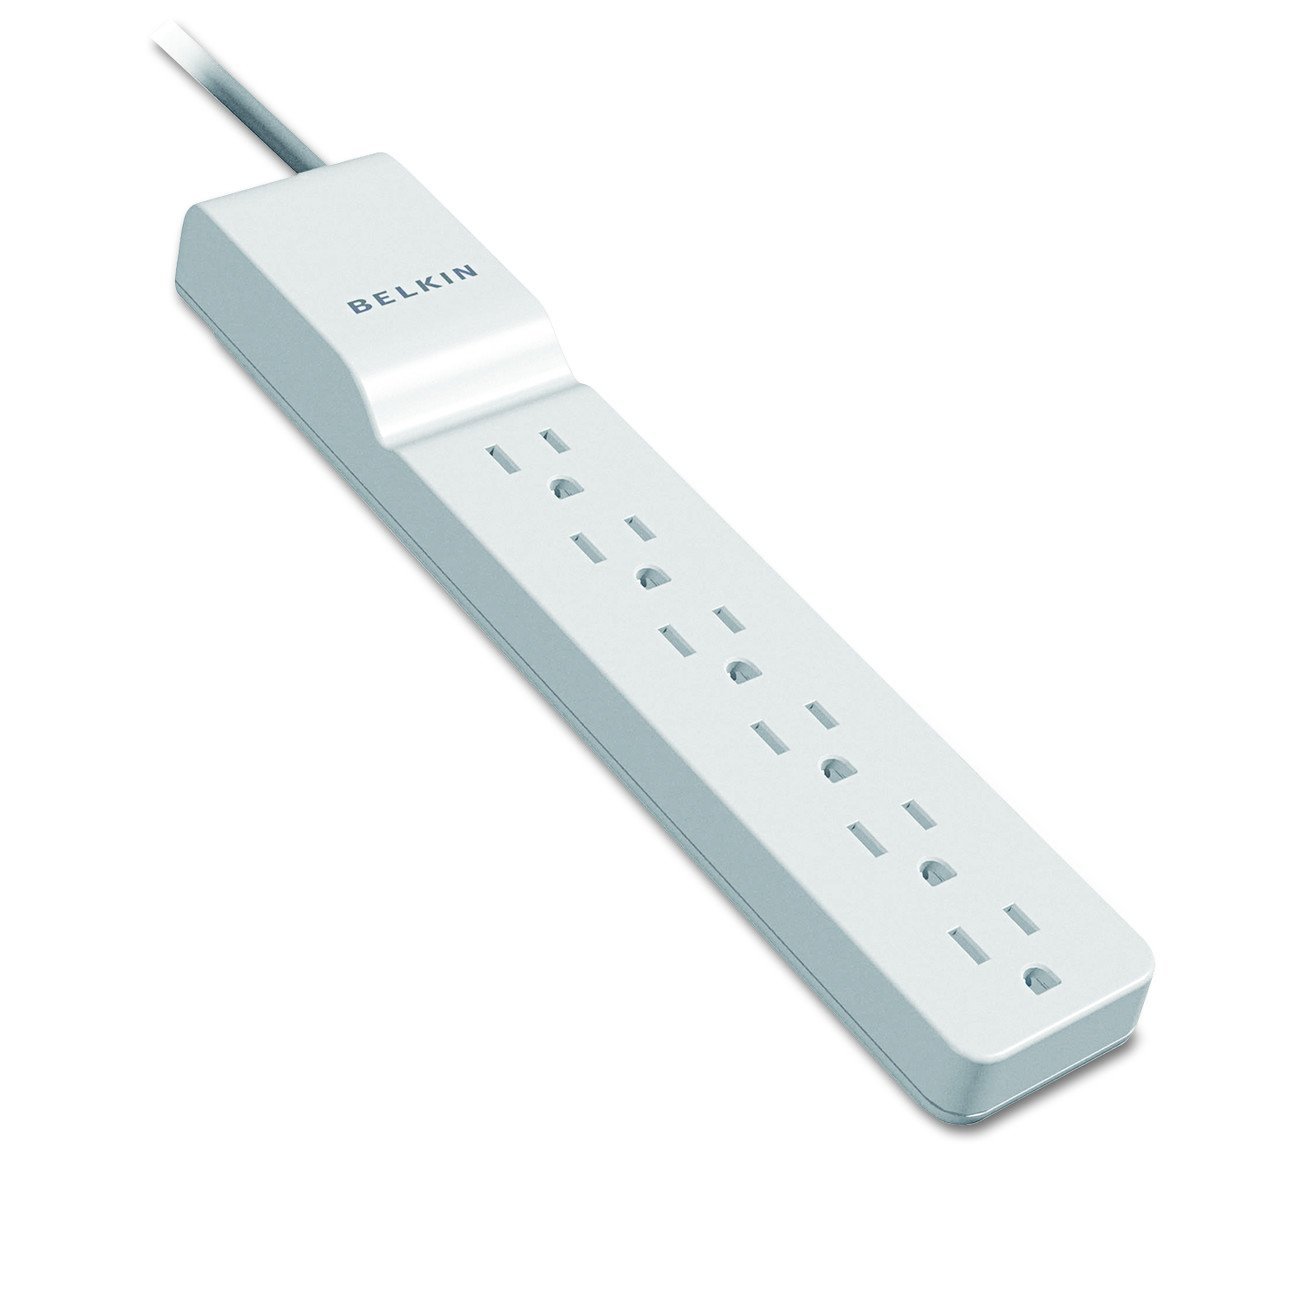 Power Strip, Belkin Surge Protector 6 AC Multiple Outlets, Flat Rotating Plug, 6 ft Long Heavy Duty Extension Cord for Home, Office, Travel, Computer Desktop & Charging Brick, White (1080 Joules)